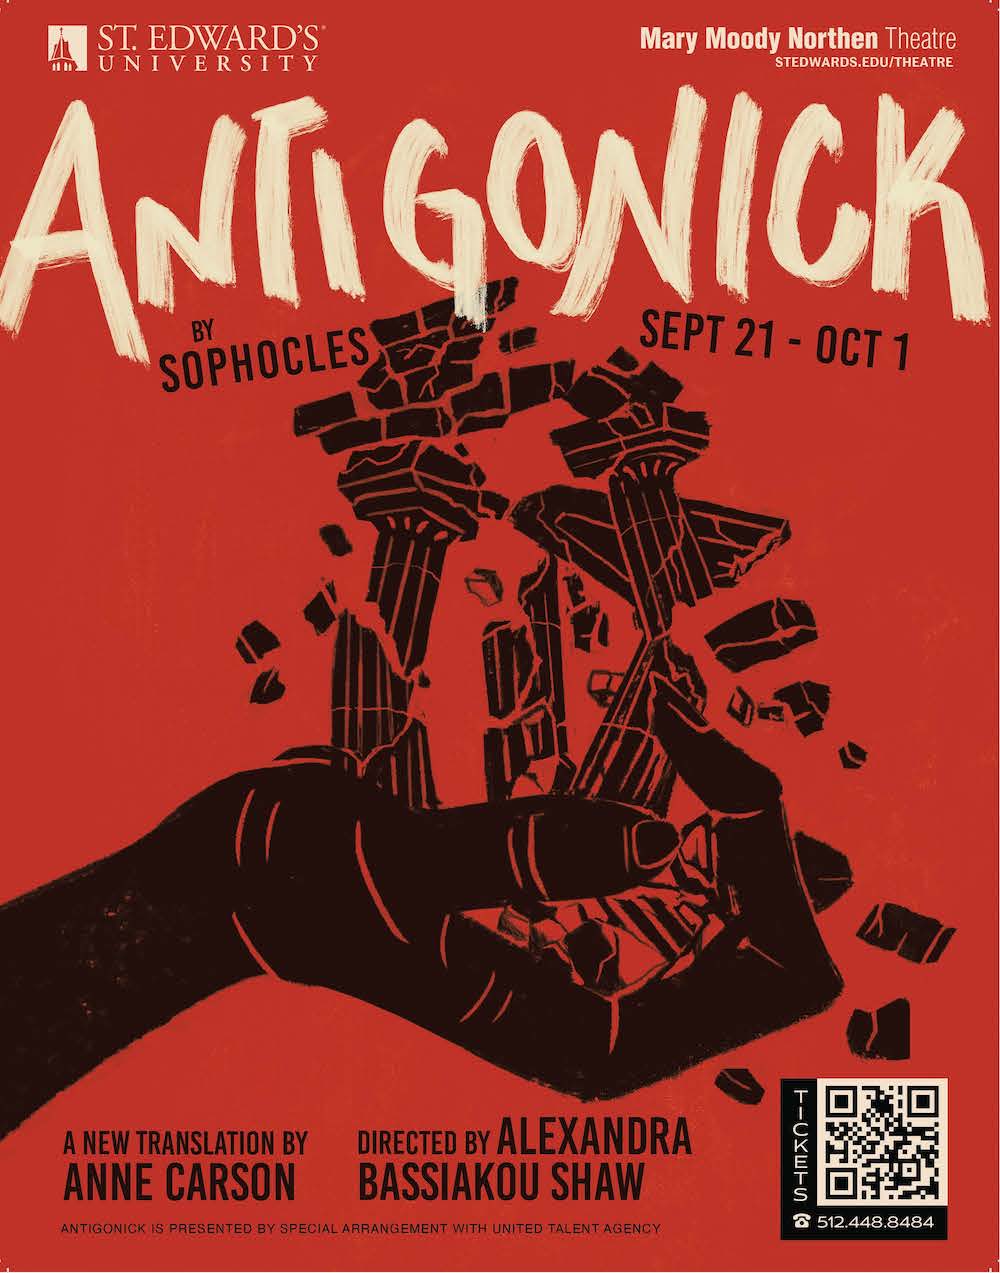 Antigonick by Mary Moody Northen Theatre